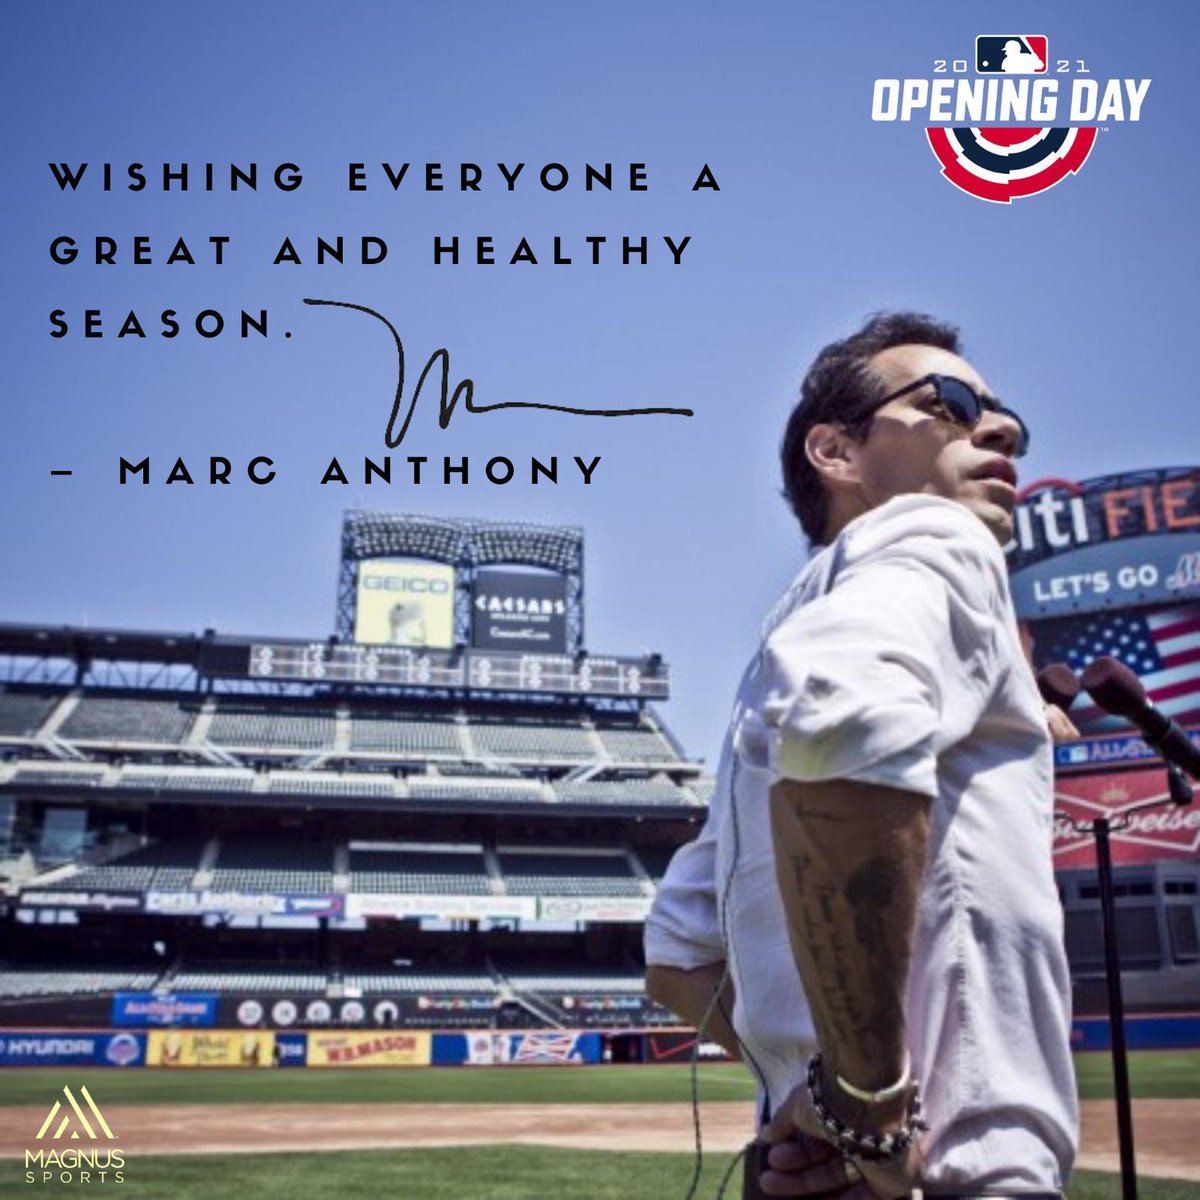 Mi gente, baseball is back, let’s play ball! Esto sigue! #MagnusStrong #OpeningDay ⚾️ 💪 